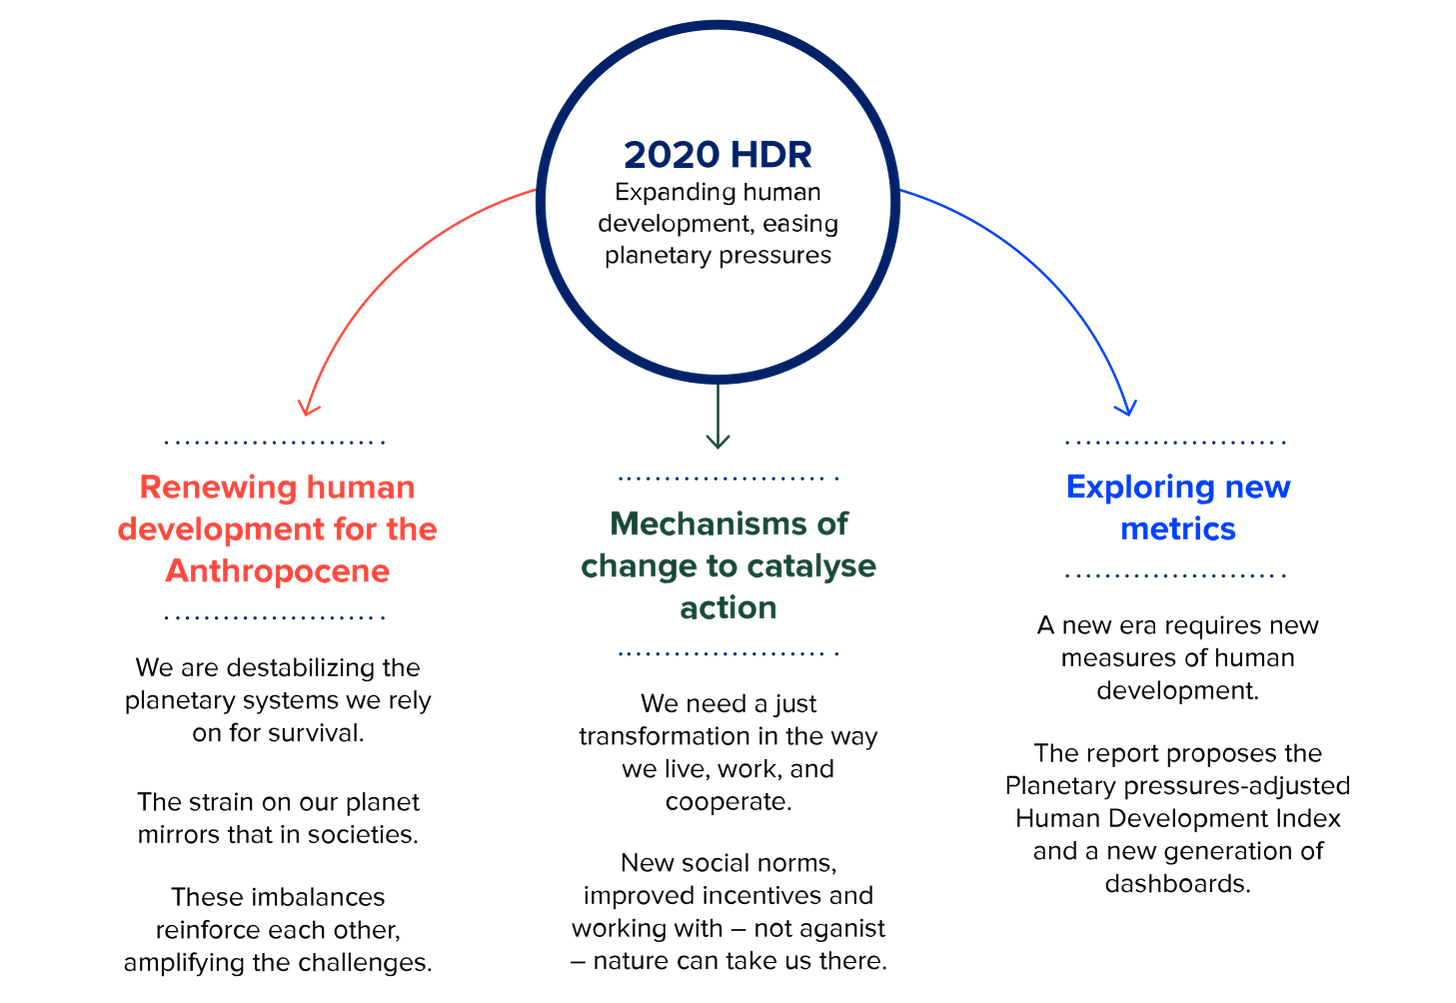 Structure of the 2020 Human Development Report